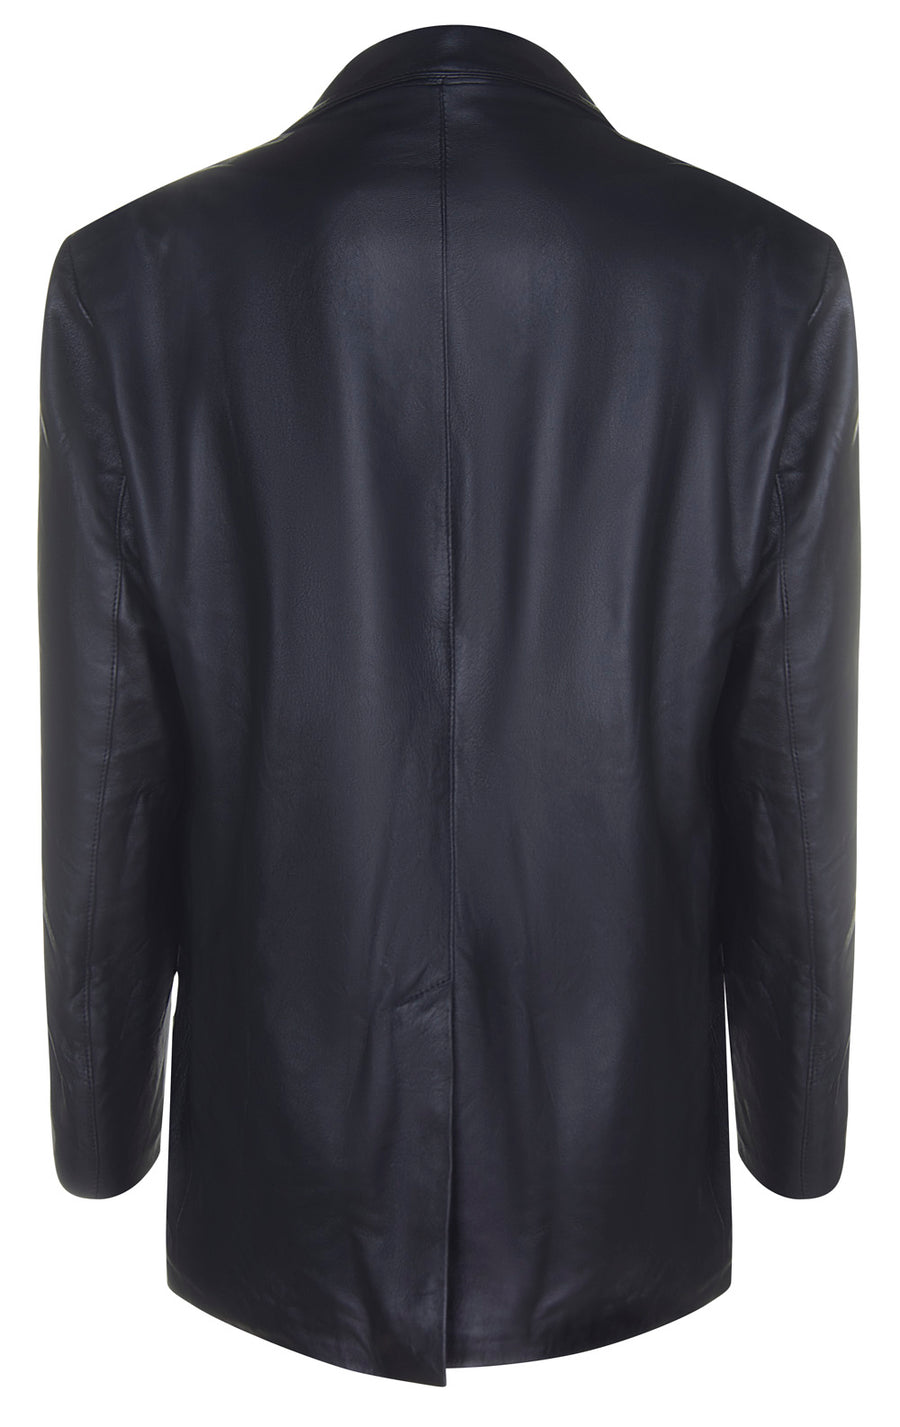 Mission Impossible Leather Blazer in Black Lambskin